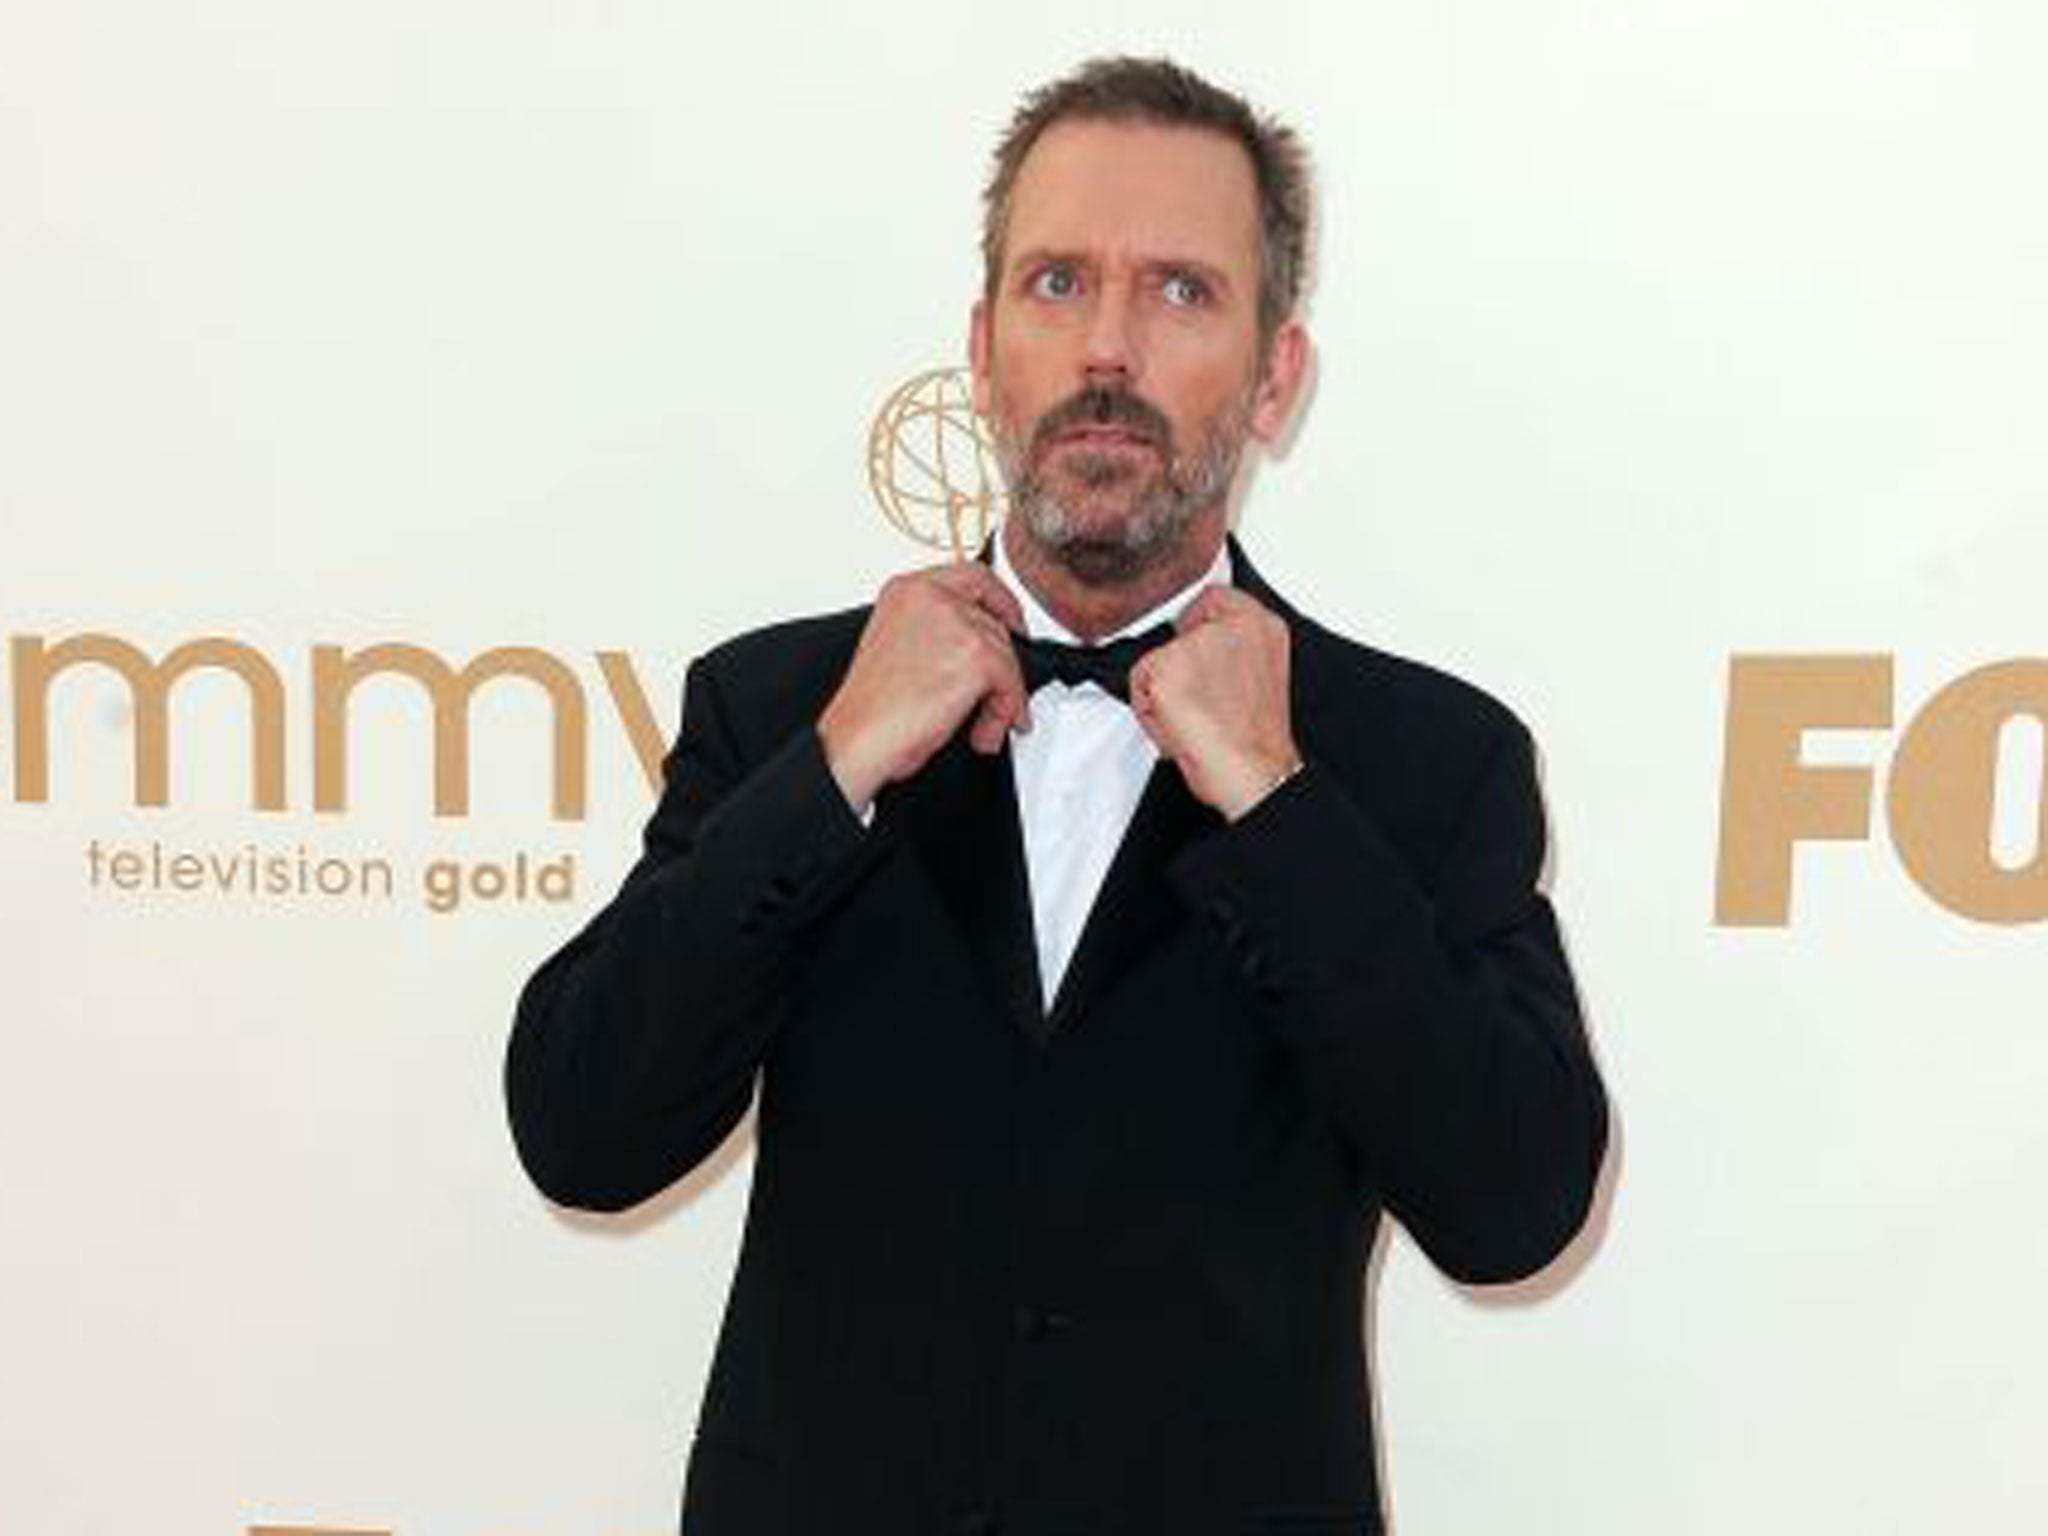 Hugh Laurie Age: 53 Estimated wealth: £15m to £20m Biggest Hits: Blackadder, Jeeves and Wooster, House, The Oranges, Let Them Talk (album) Quote: “I don’t have a single complete show or movie or anything else that I could look at and s